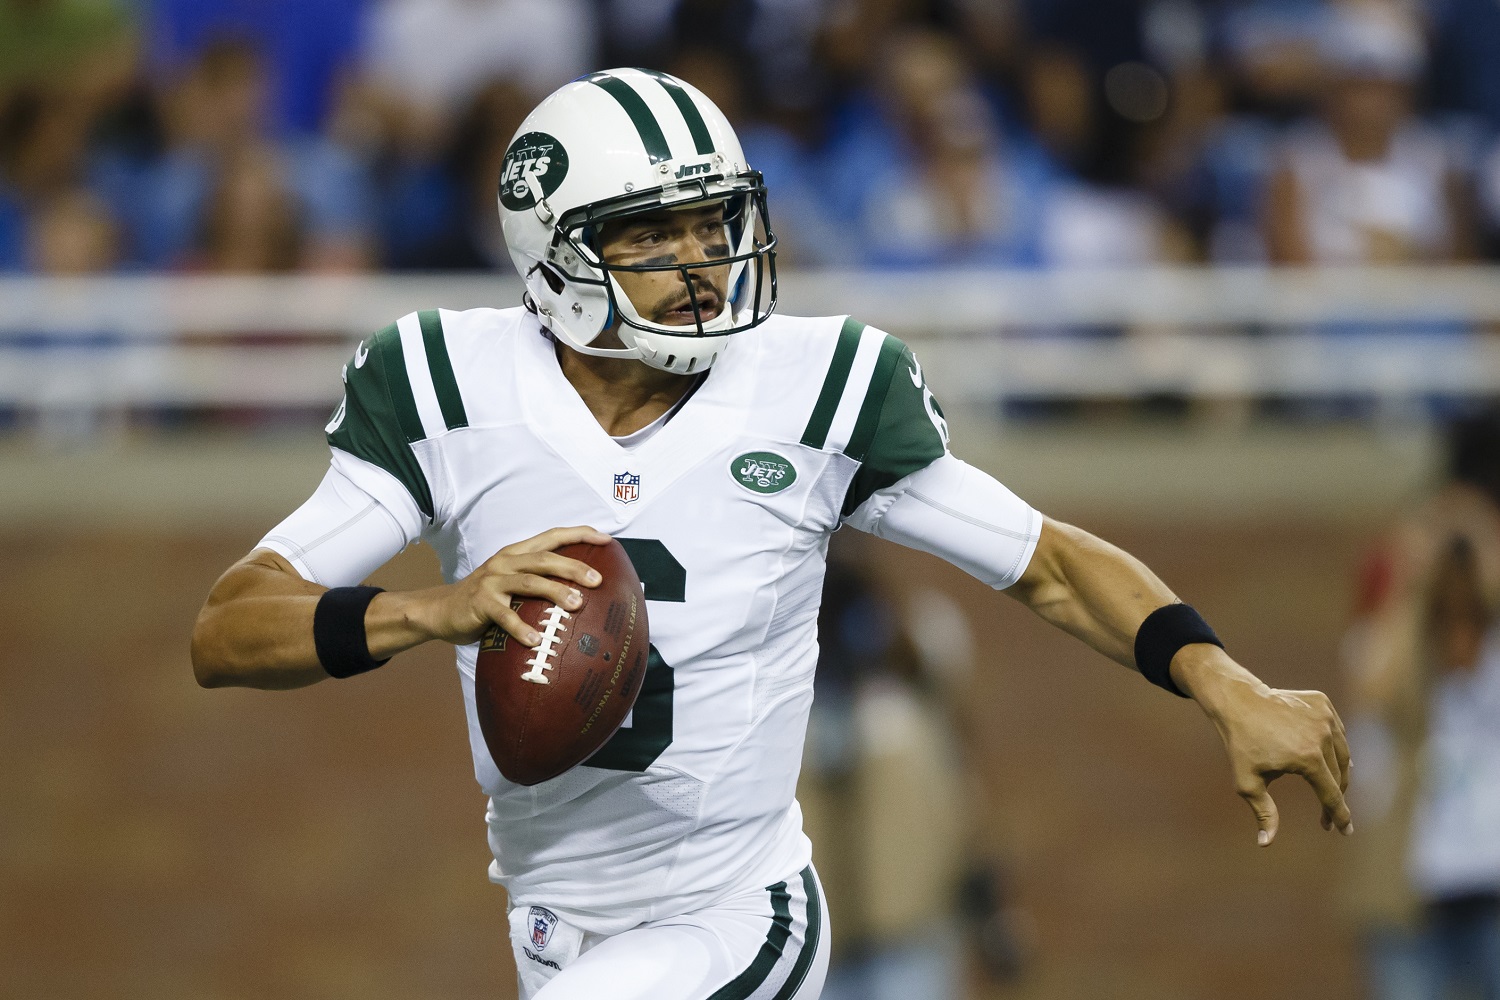 FILE - In this Friday, Aug. 9, 2013 file photo, New York Jets quarterback Mark Sanchez (6) drops back to pass against the Detroit Lions in the first quarter of an NFL football game in Detroit. Sanchez will start for the preseason home game against the Jacksonville Jaguars on Saturday. (AP Photo/Rick Osentoski, File)